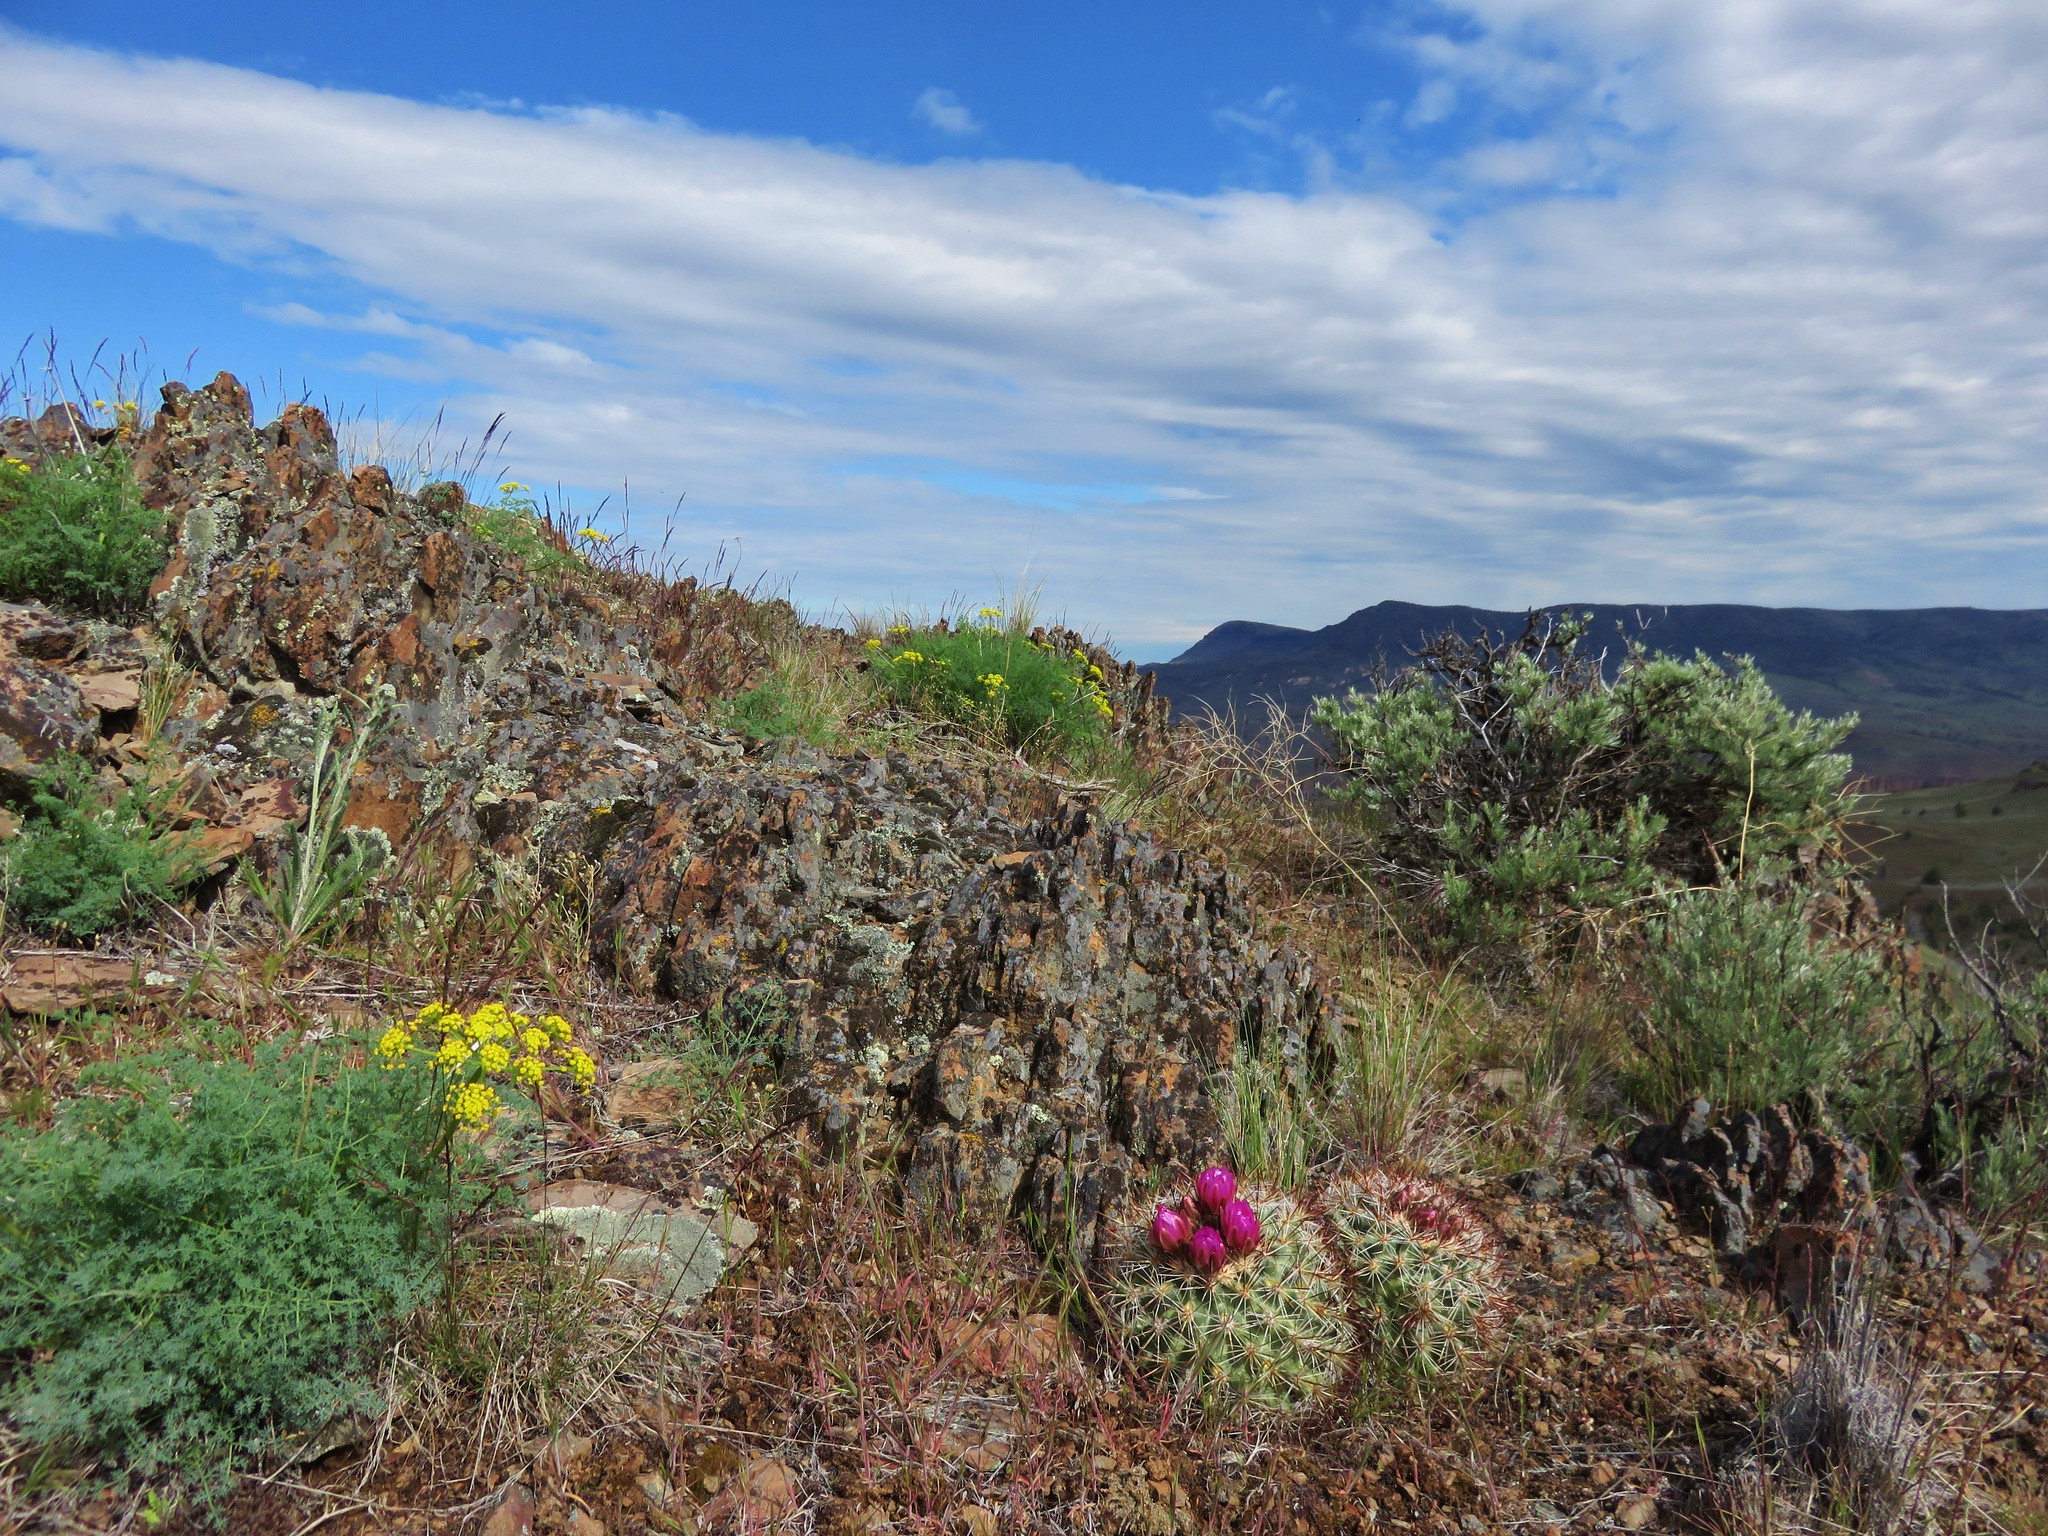 Biscuitroot and hedghog cactus in the Spring Basin Wilderness